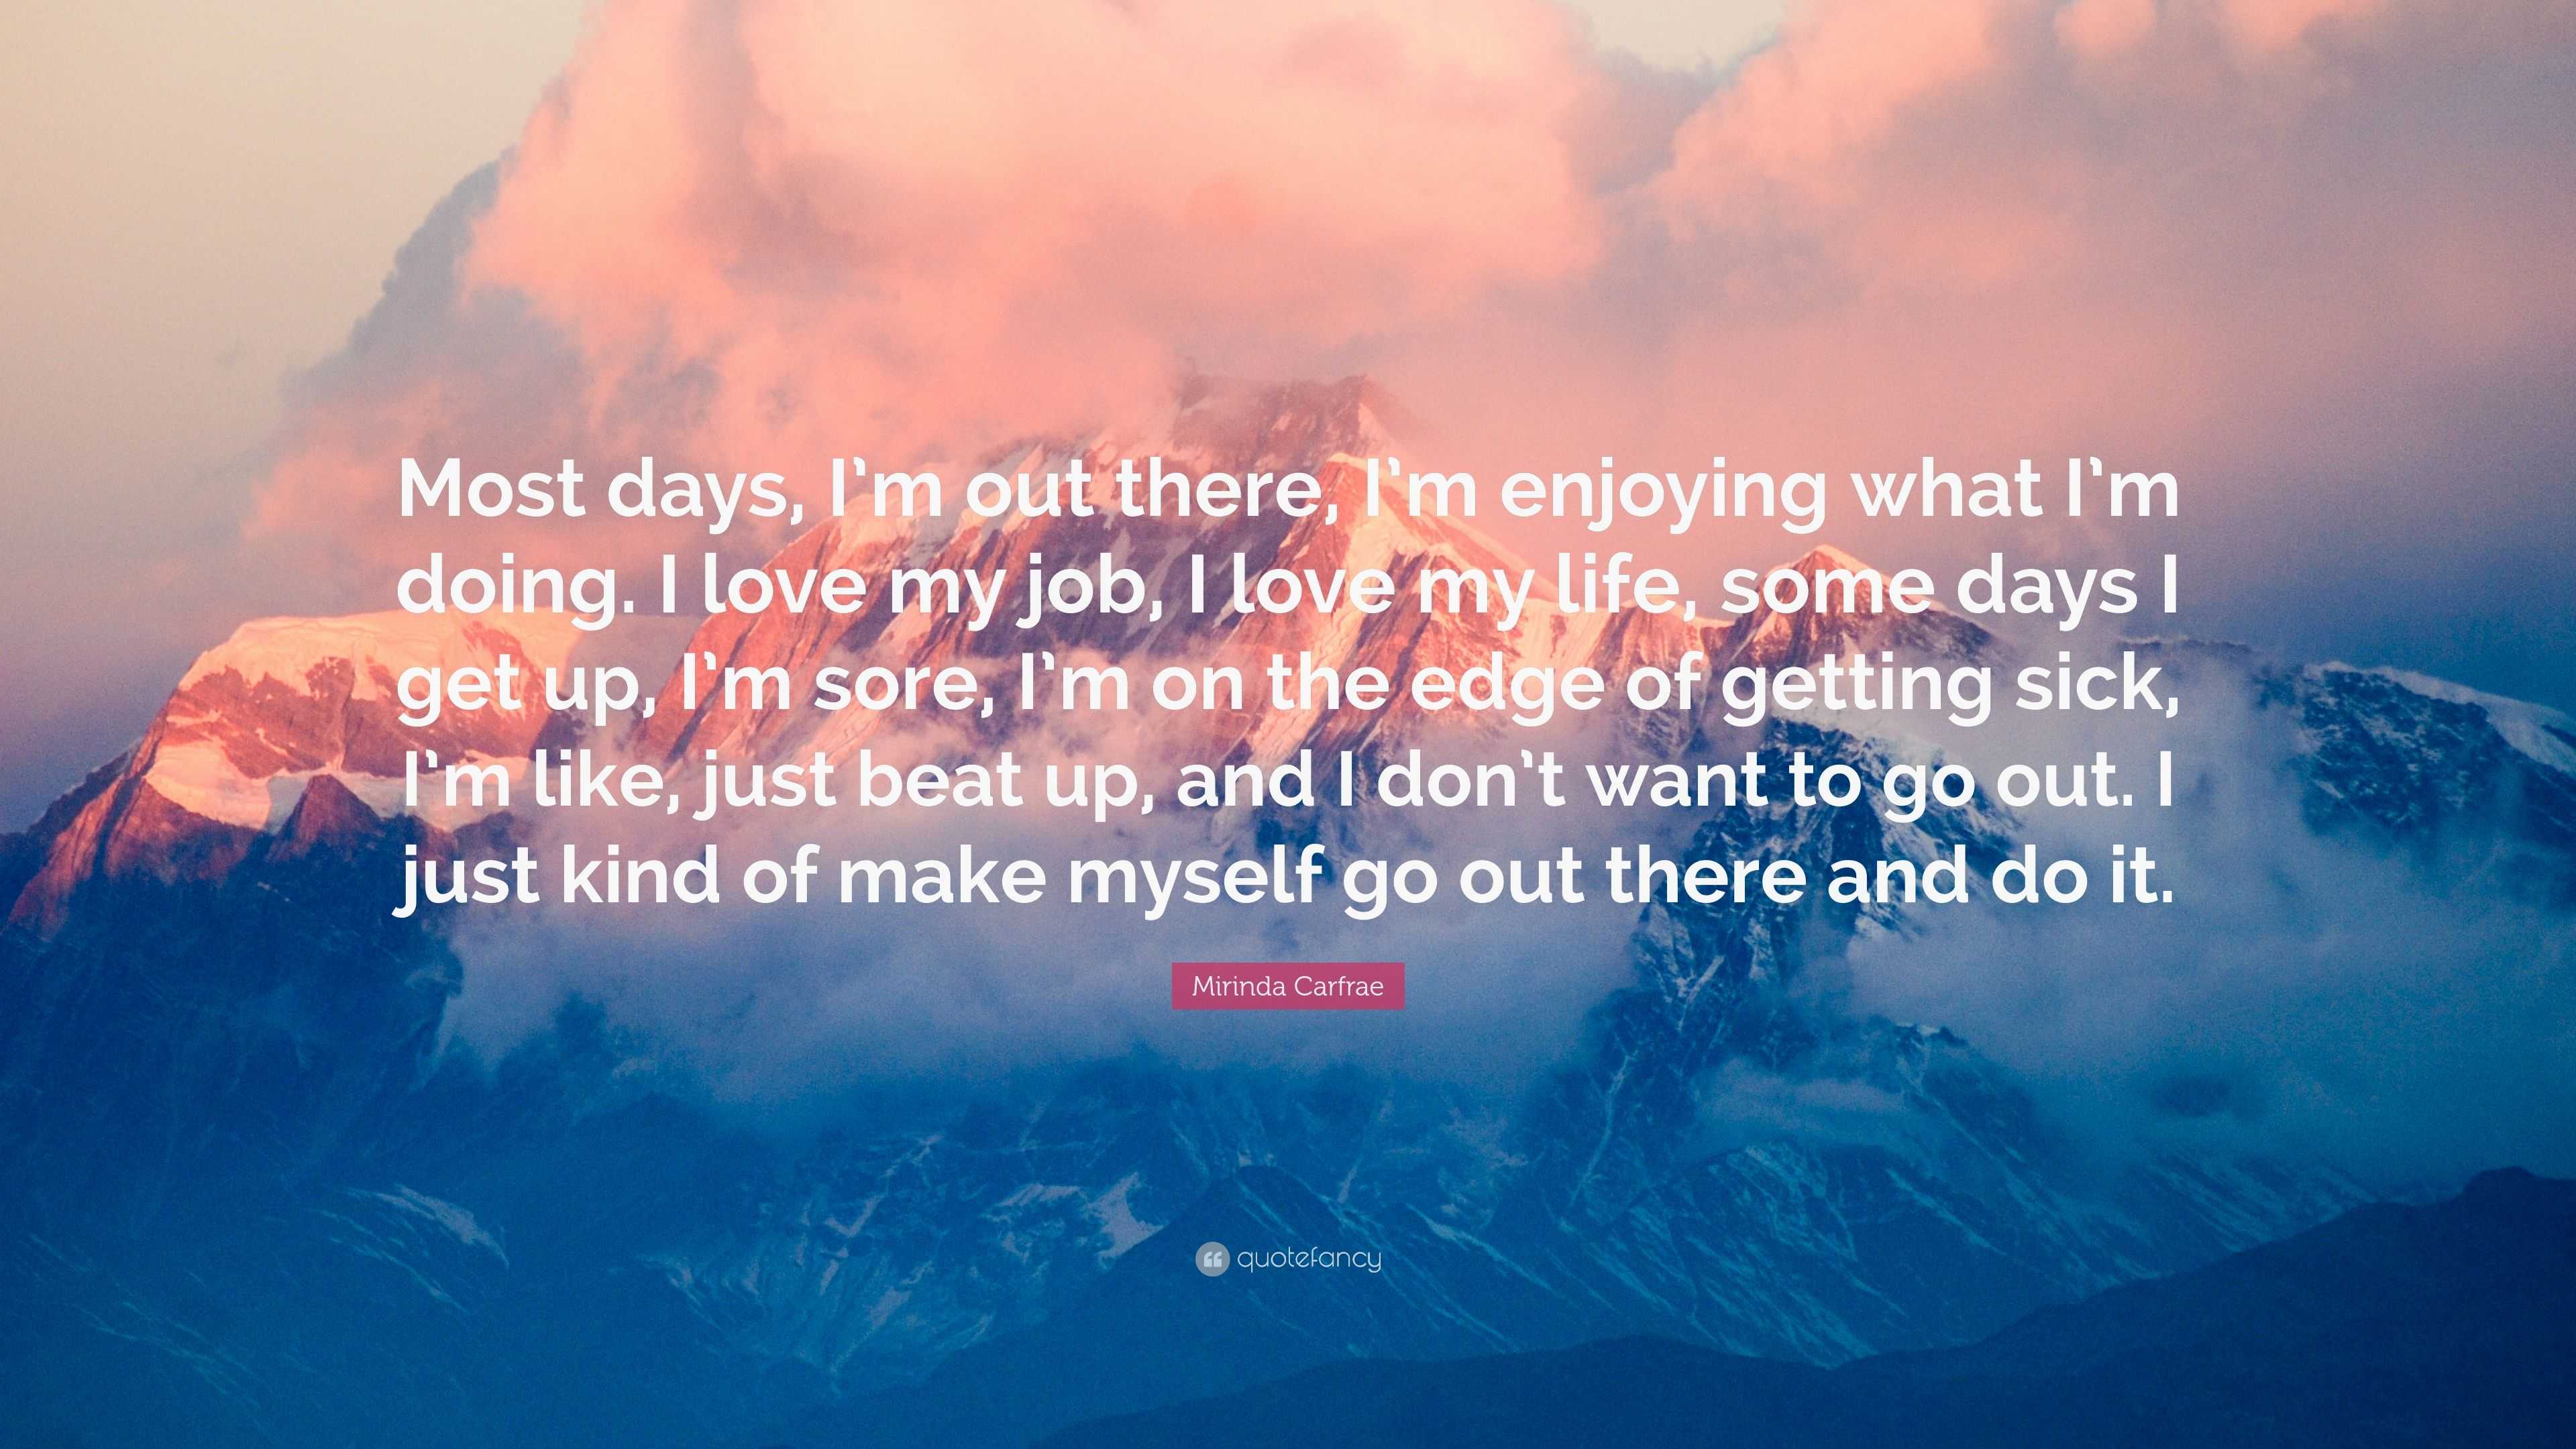 Mirinda Carfrae Quote “Most days I m out there I